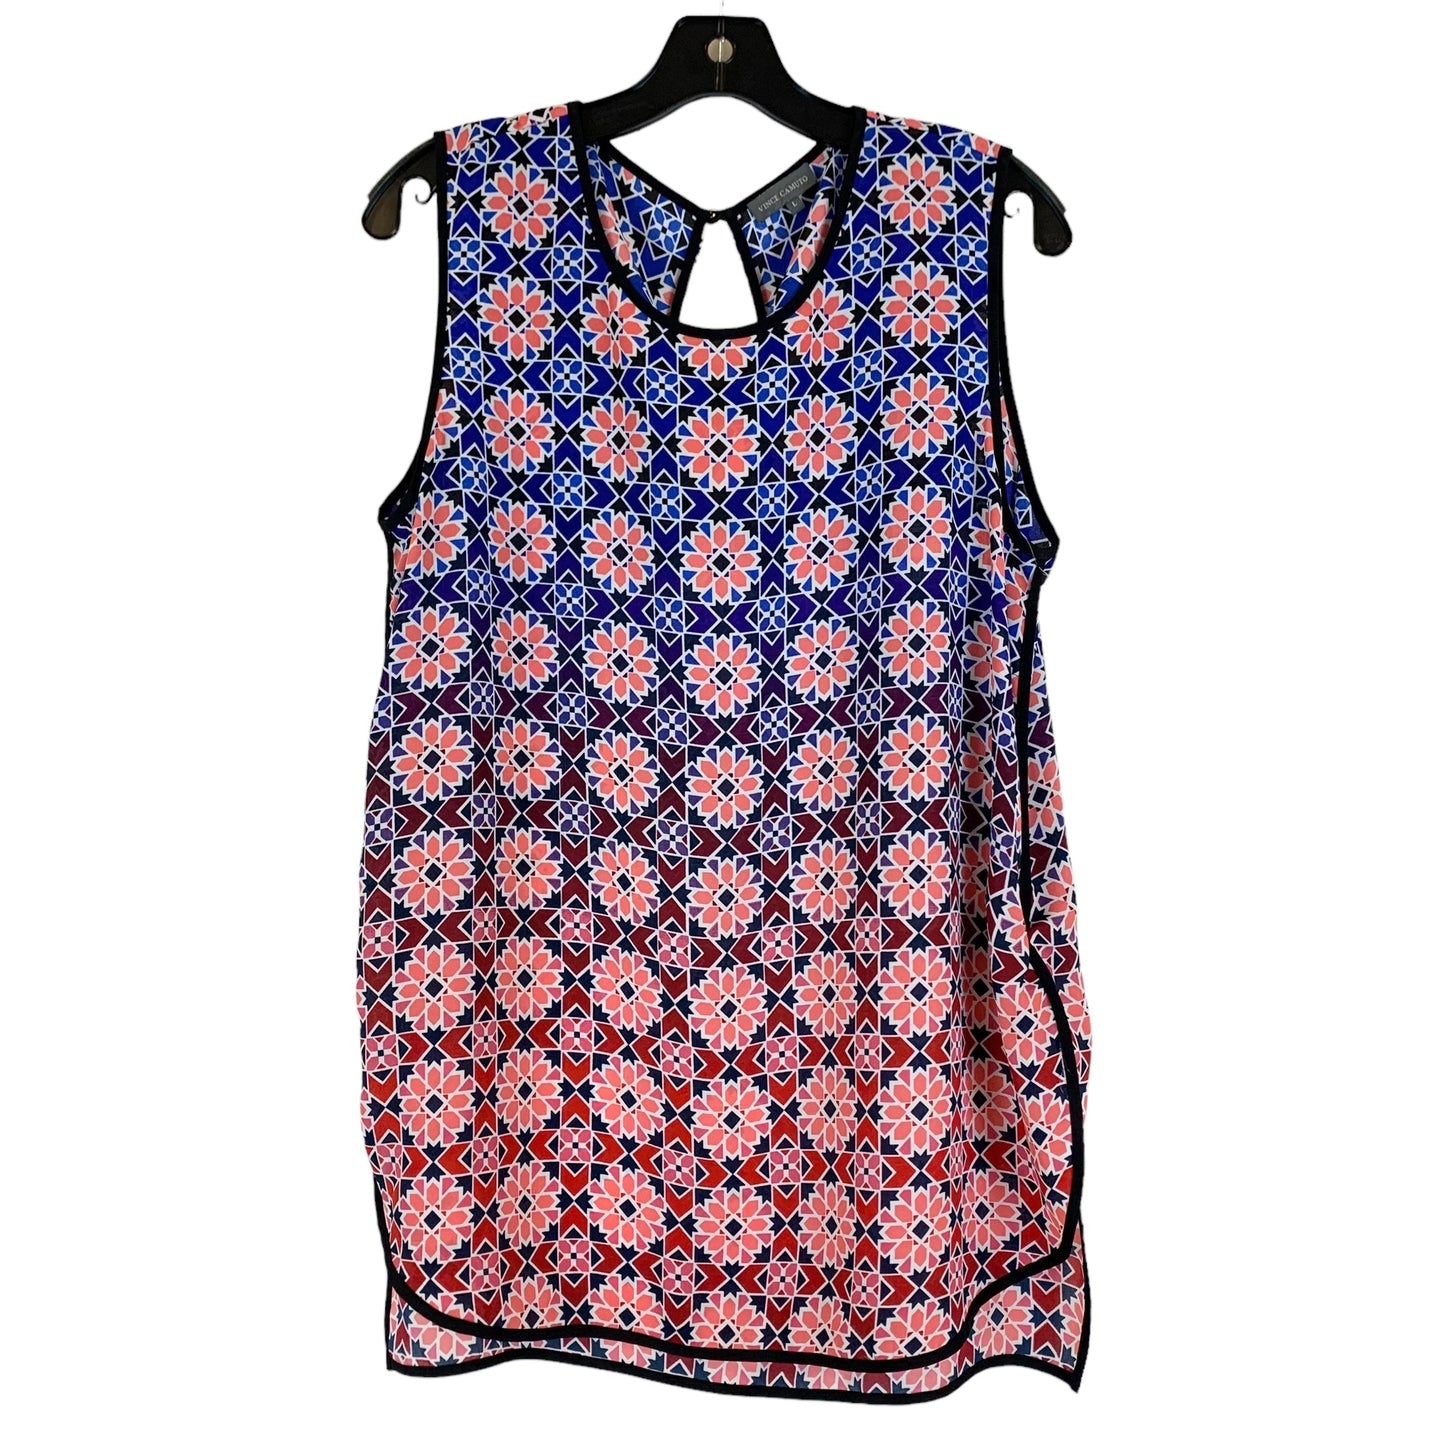 Blue & Pink Top Sleeveless Vince Camuto, Size L